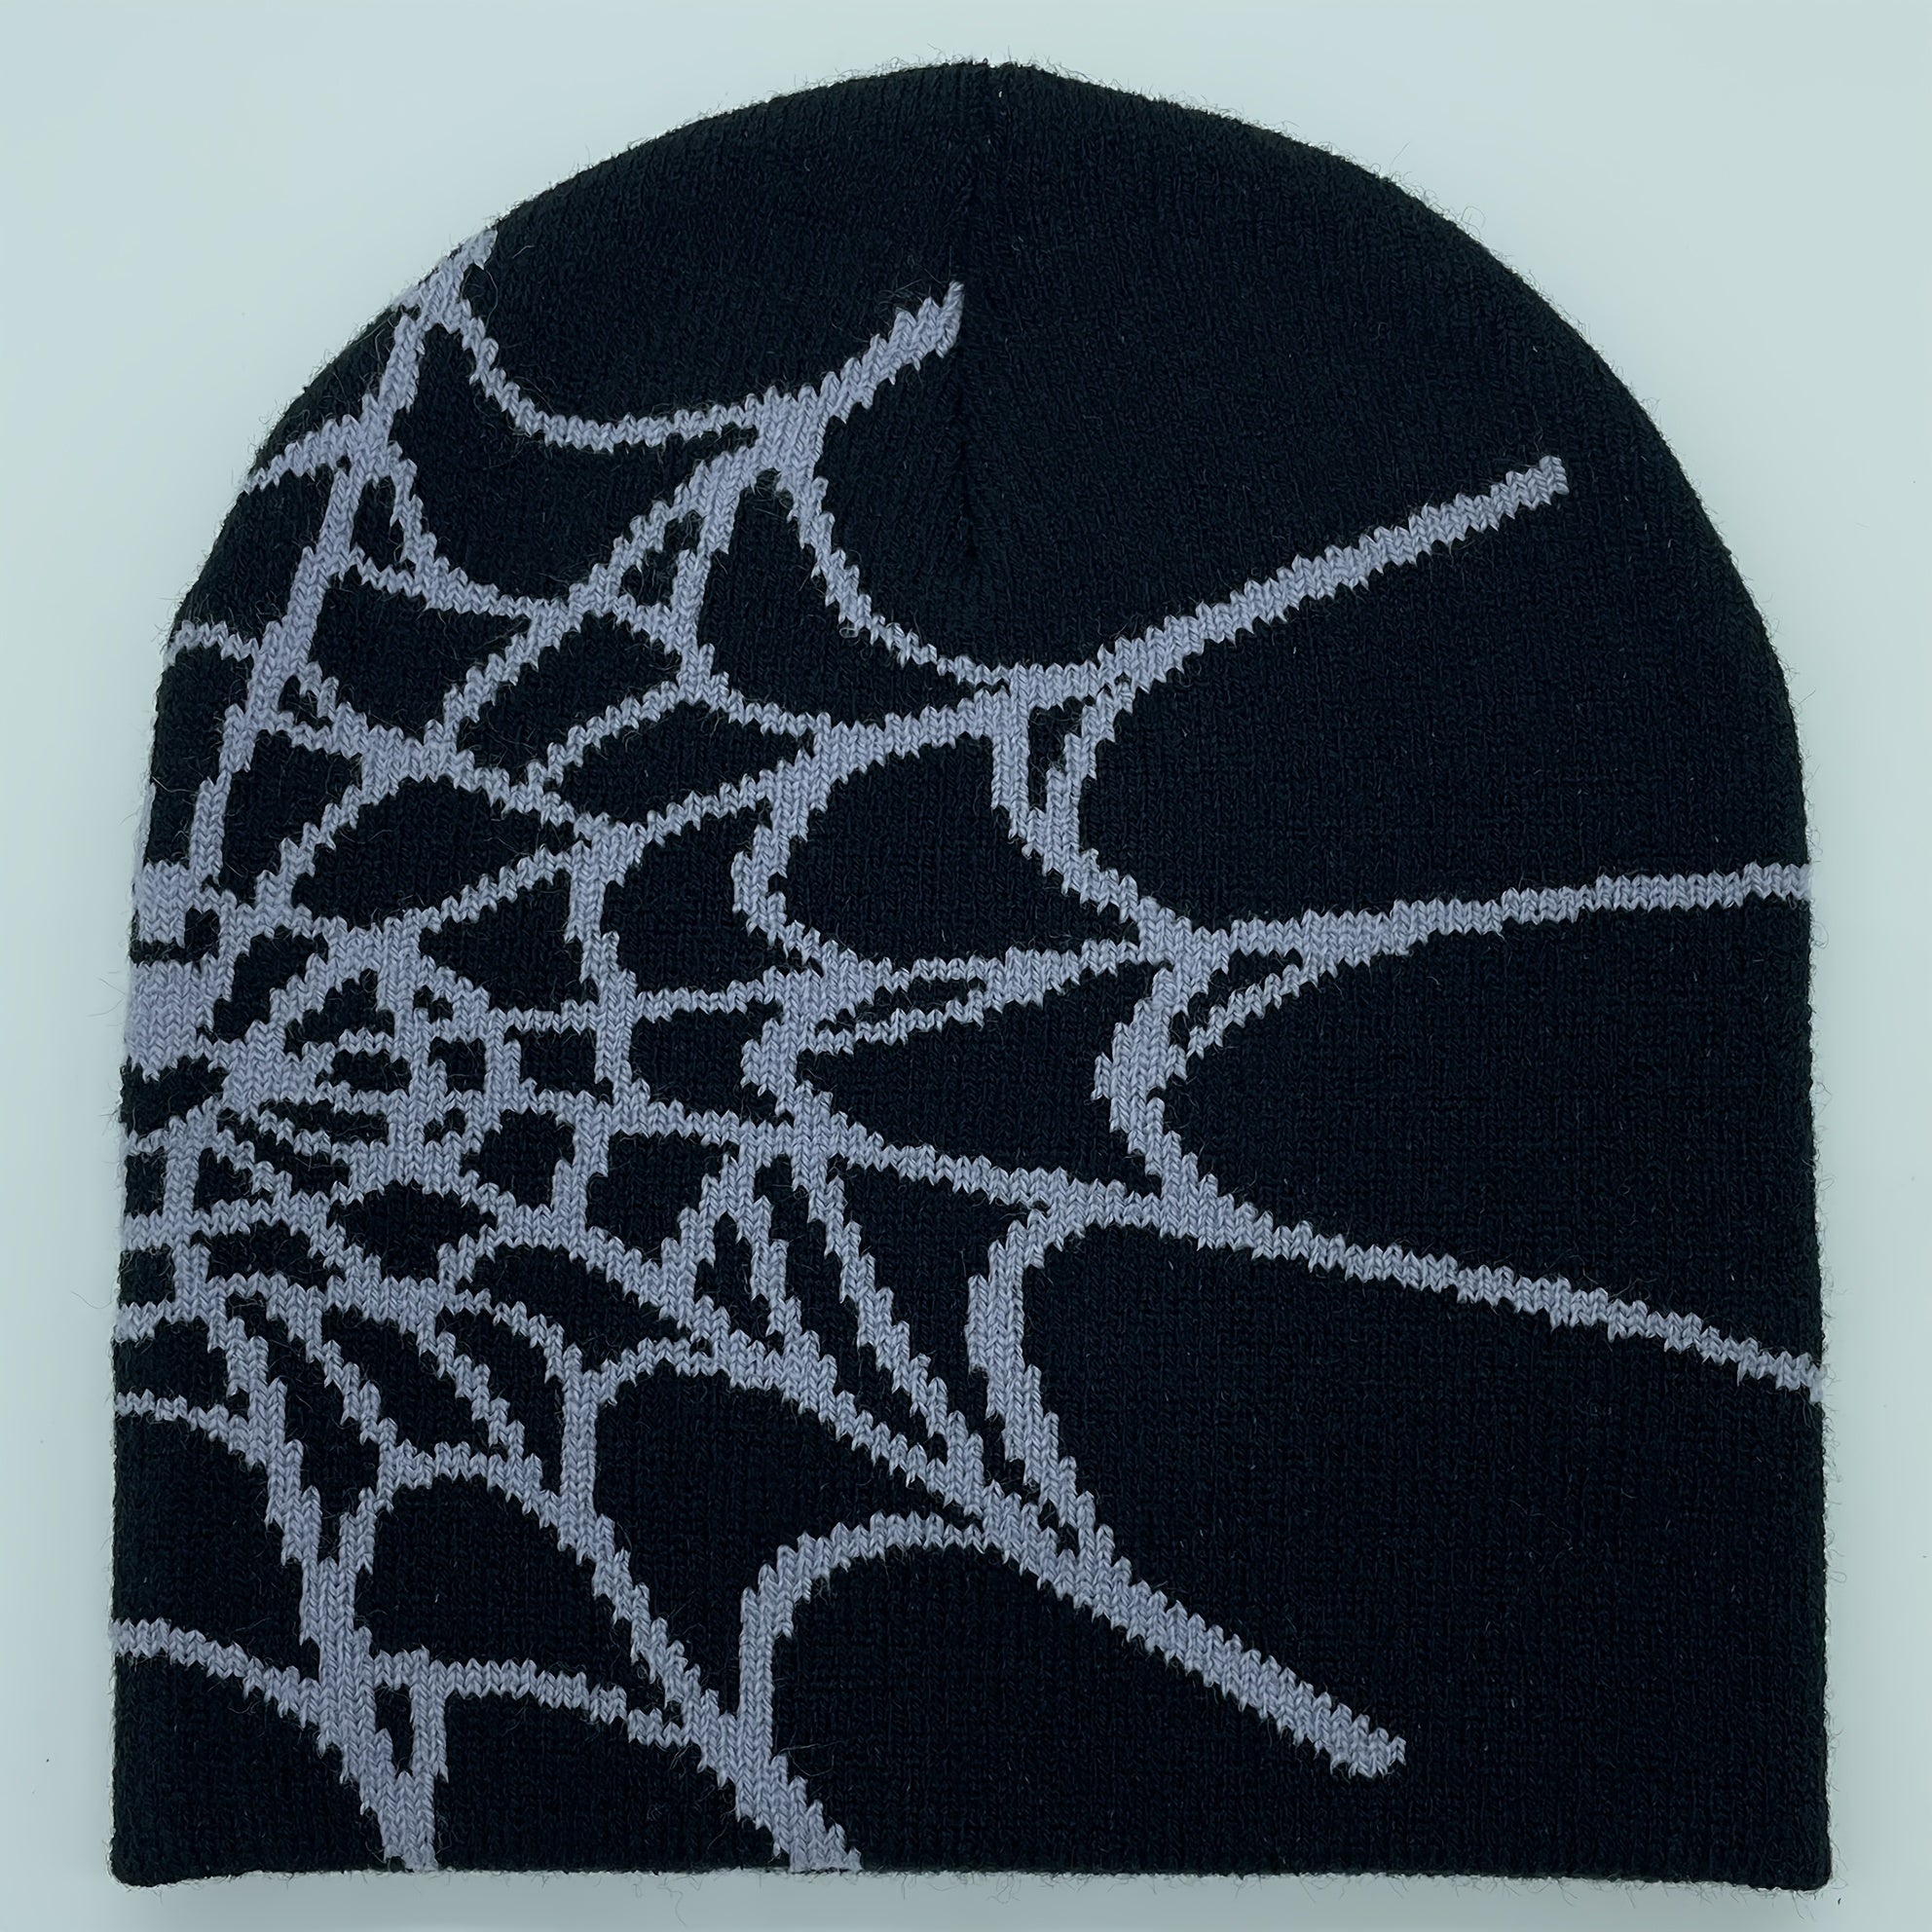 Foxeve Unisex Plain Color Slouchy Knitted Beanie Hat With Spider Web Embroidery For Autumn And Winter Christmas Gift